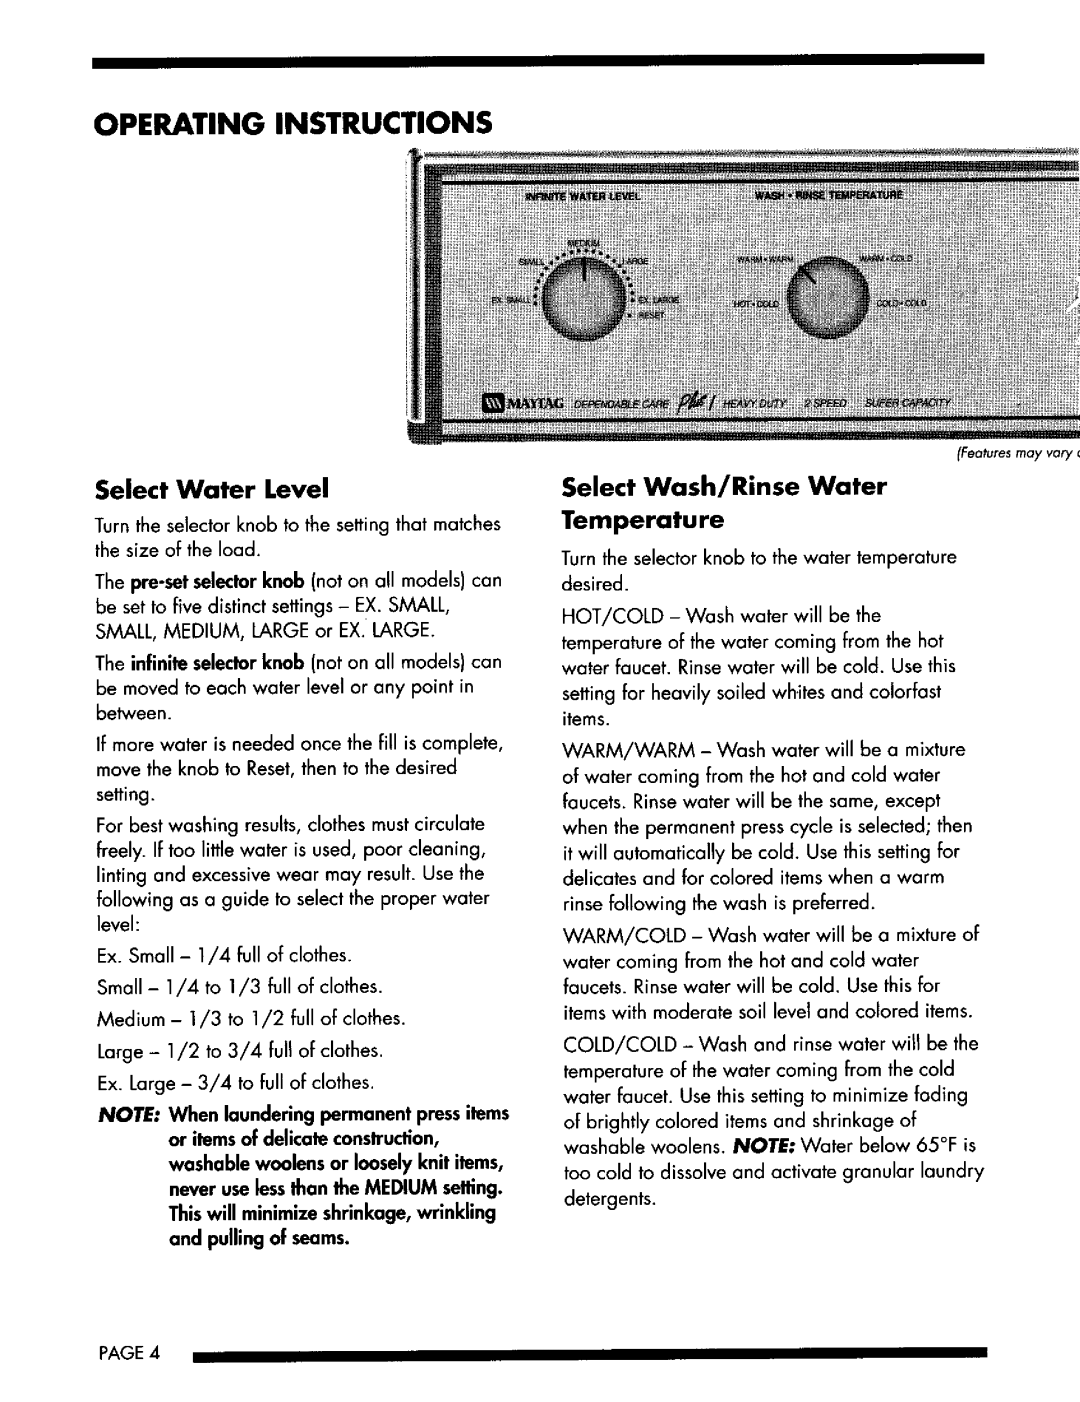 Maytag LAT9704, LAT9714, LAT9734 Operating Instructions, Select Water Level Turnthe selectorknobto the settingthat matches 